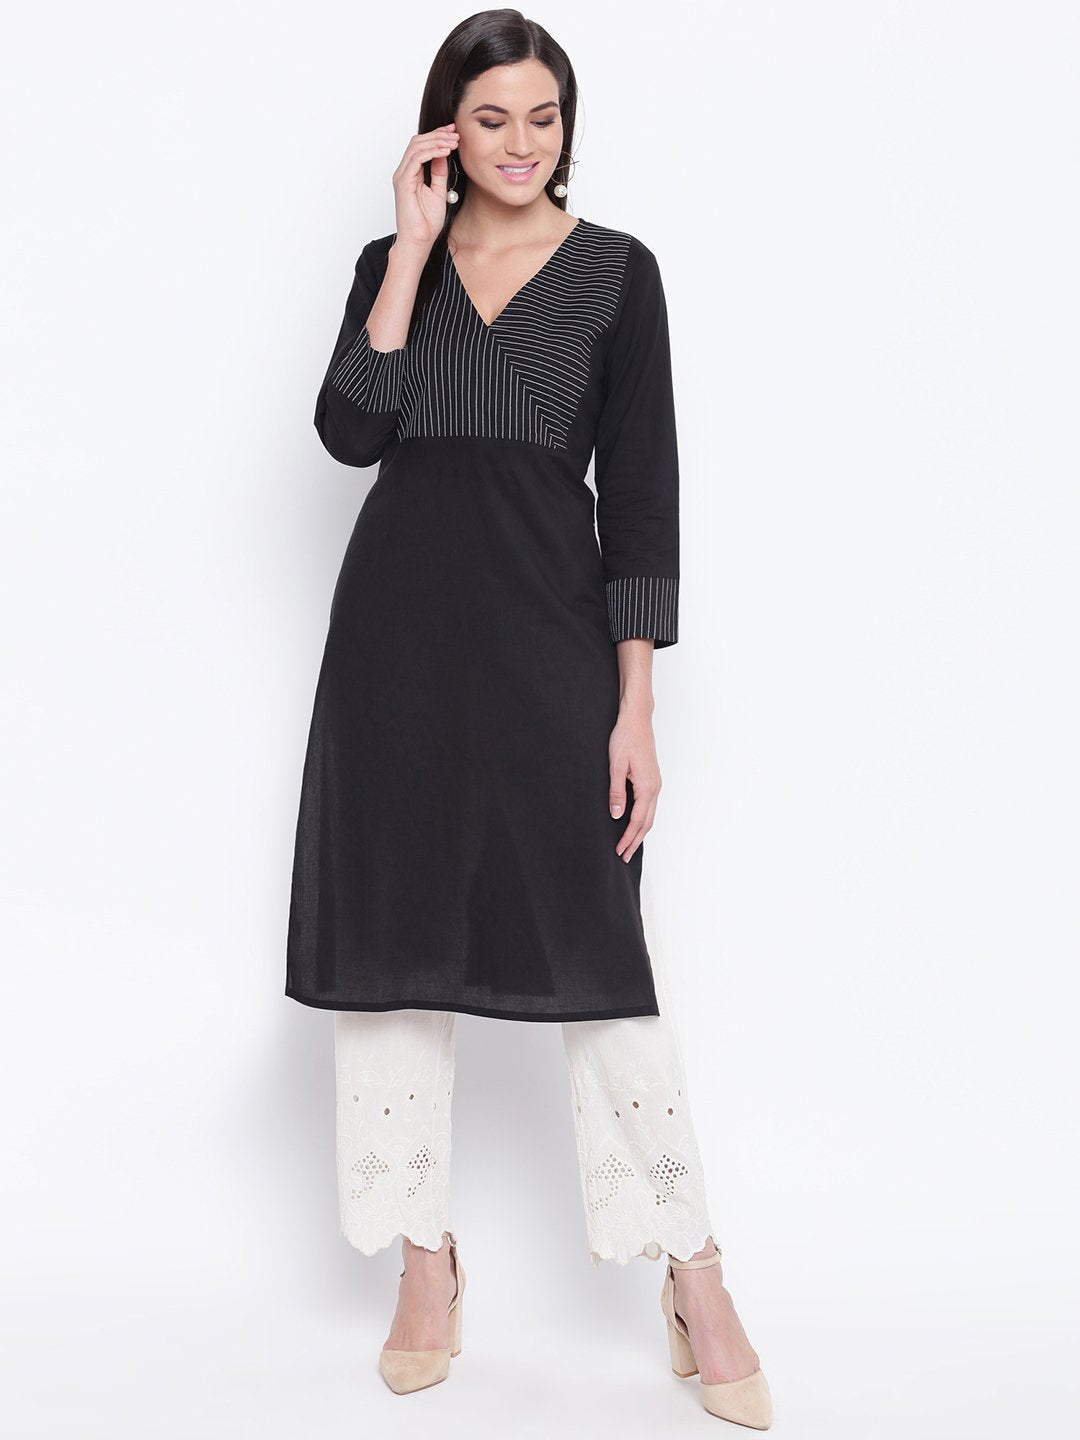 Likha Black Straight Kurta wth Gold couching on V Neck: Buy Likha Black  Straight Kurta wth Gold couching on V Neck Online at Best Price in India |  Nykaa